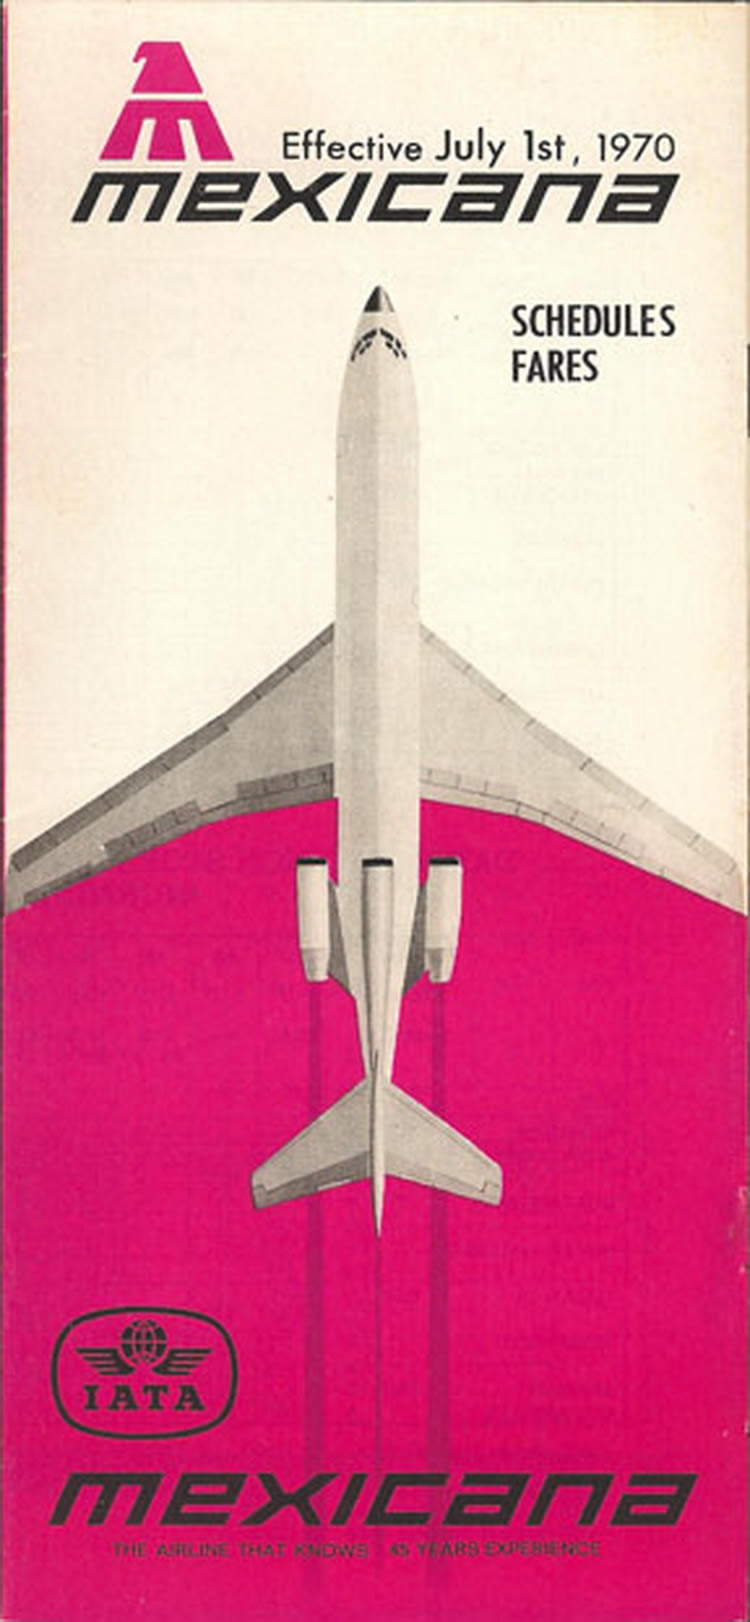 vintage airline timetable for MEXICANA Airlines